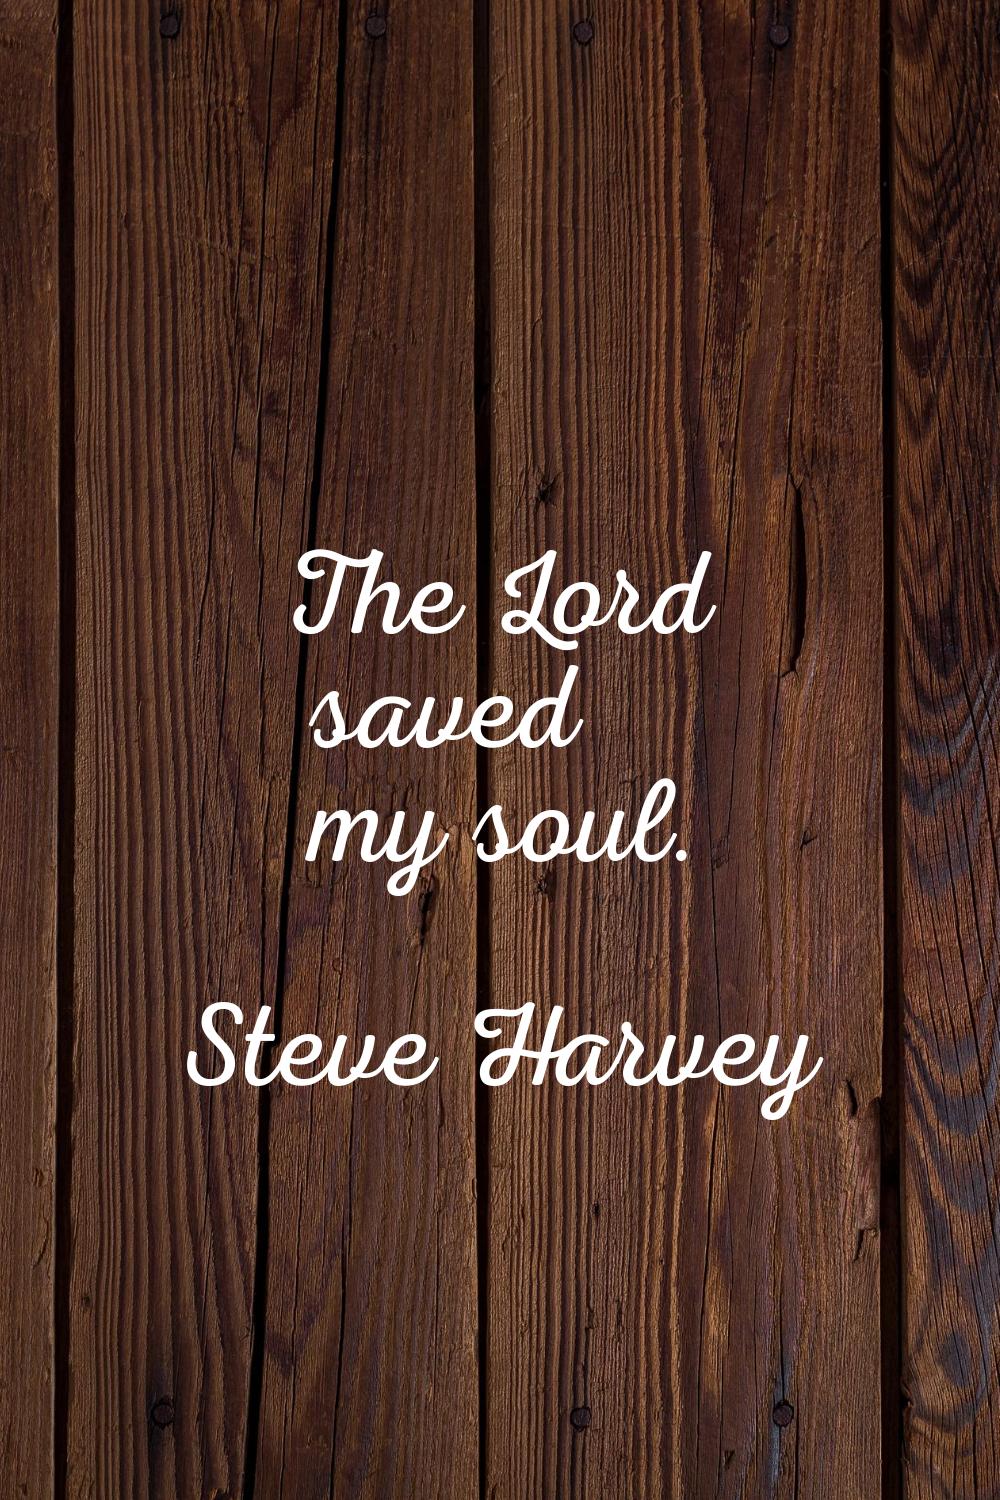 The Lord saved my soul.